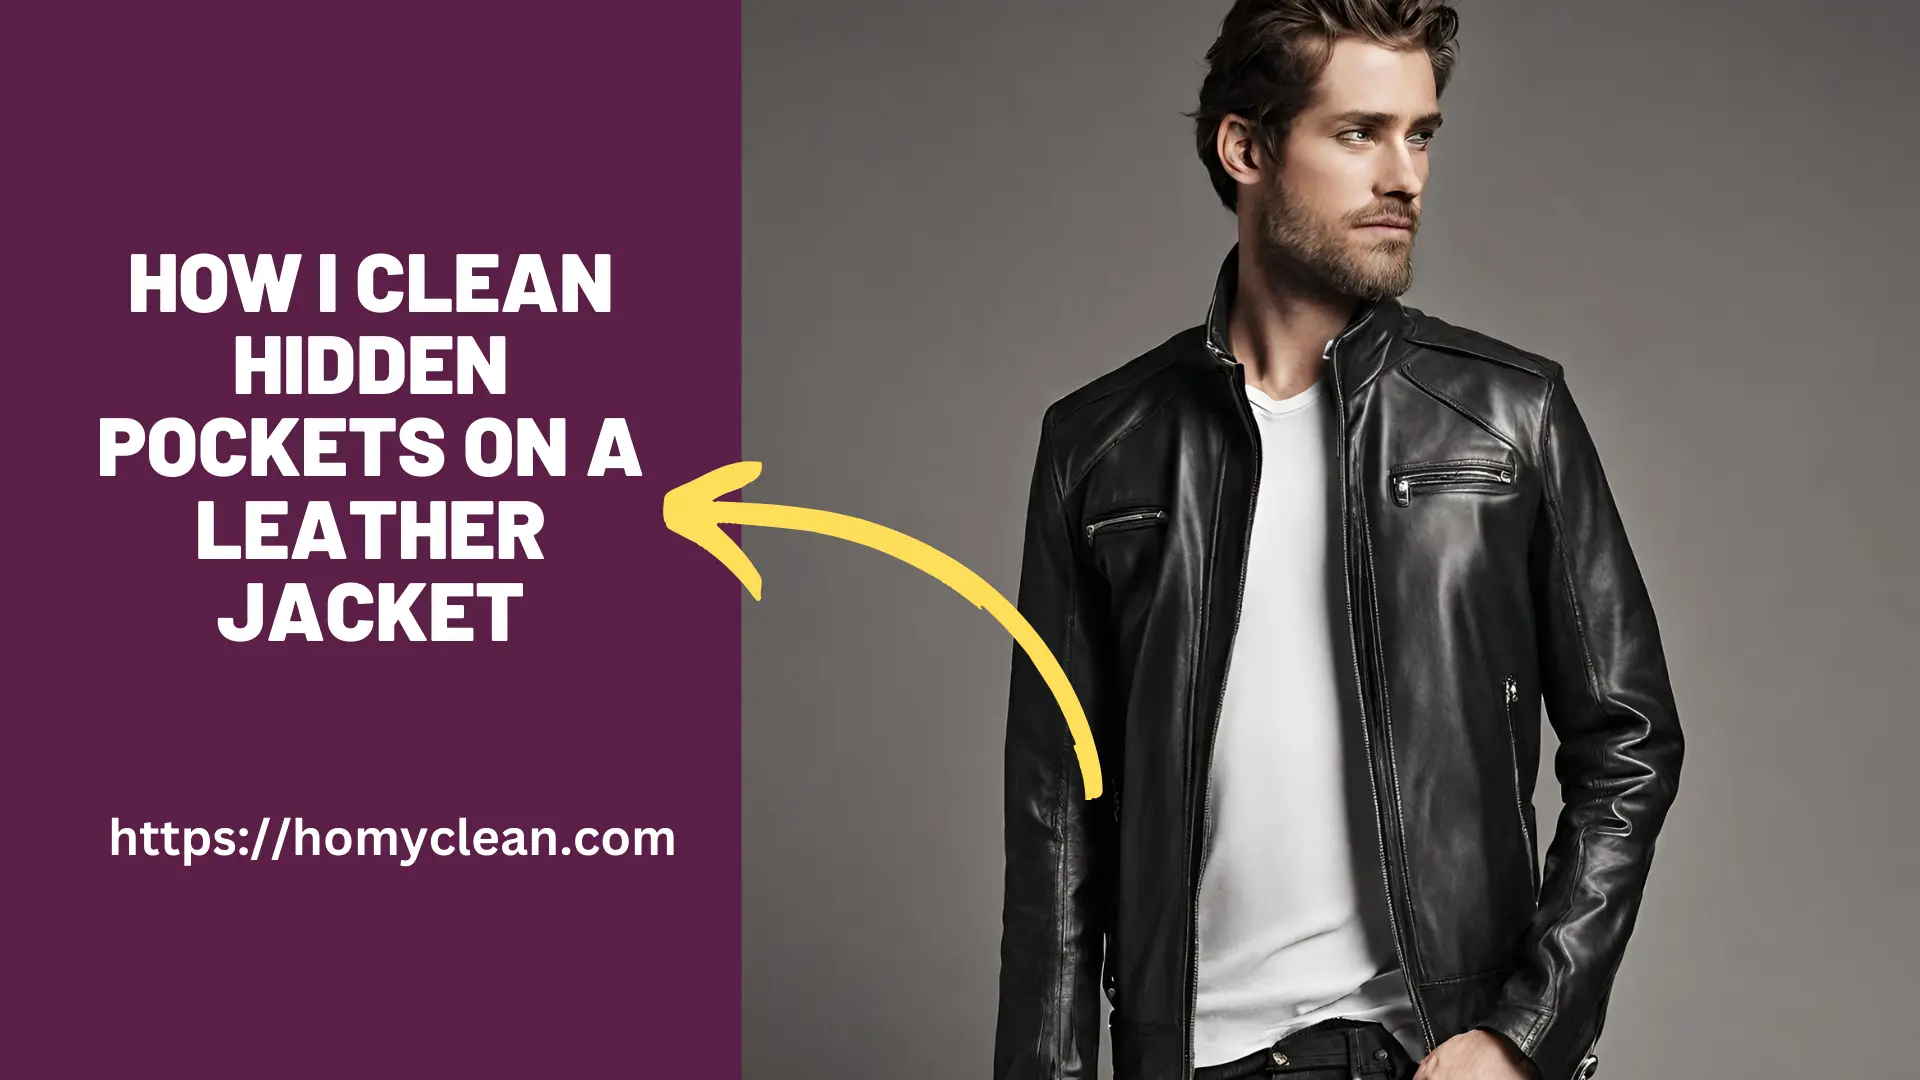 How I Clean Hidden Pockets On A Leather Jacket (6 Steps)